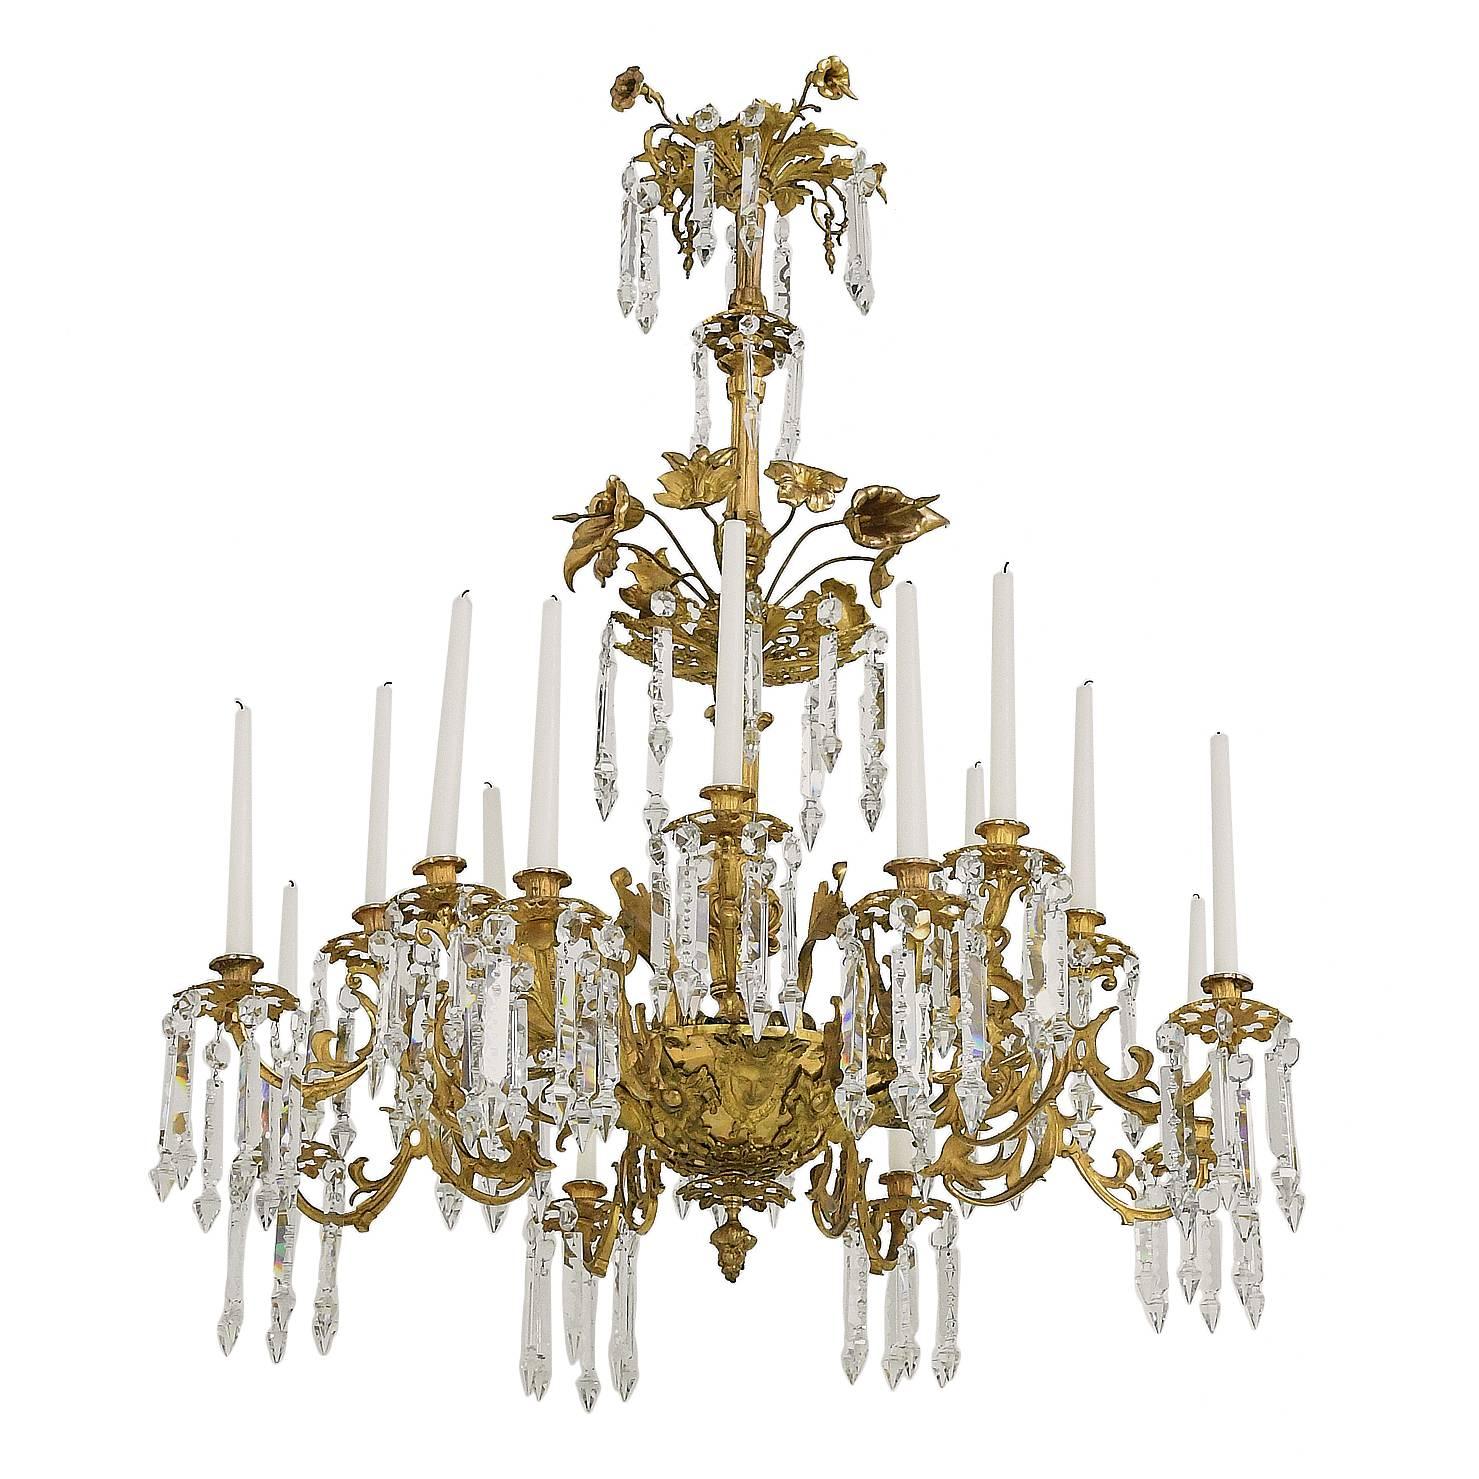 French Rococo Style Bronze Doré Chandelier with 16 Candles & 6 lights, ca 1840